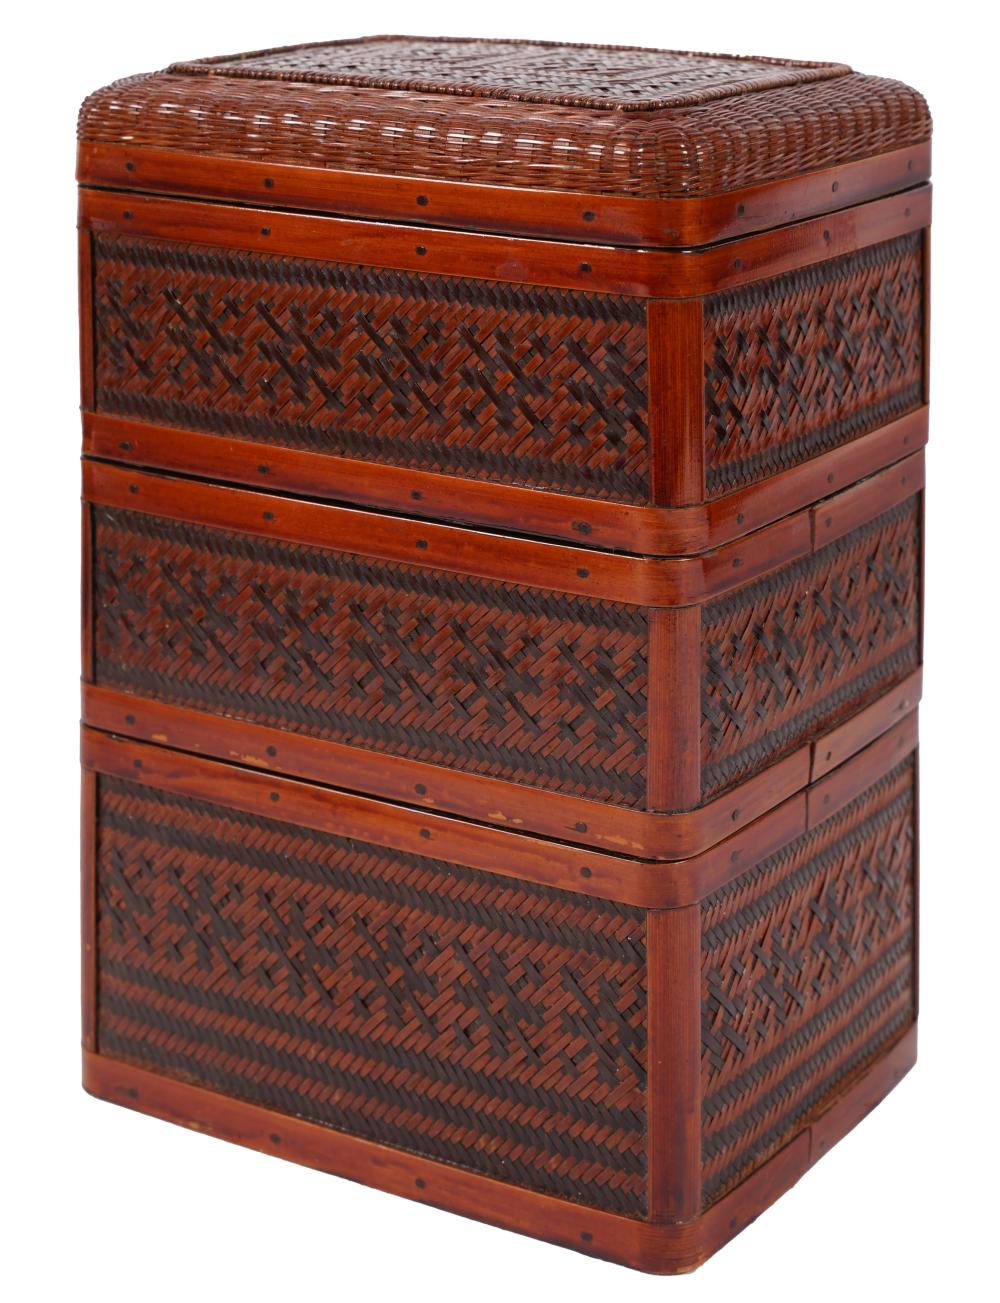 CHINESE LACQUERED WOOD AND WICKER 301eeb